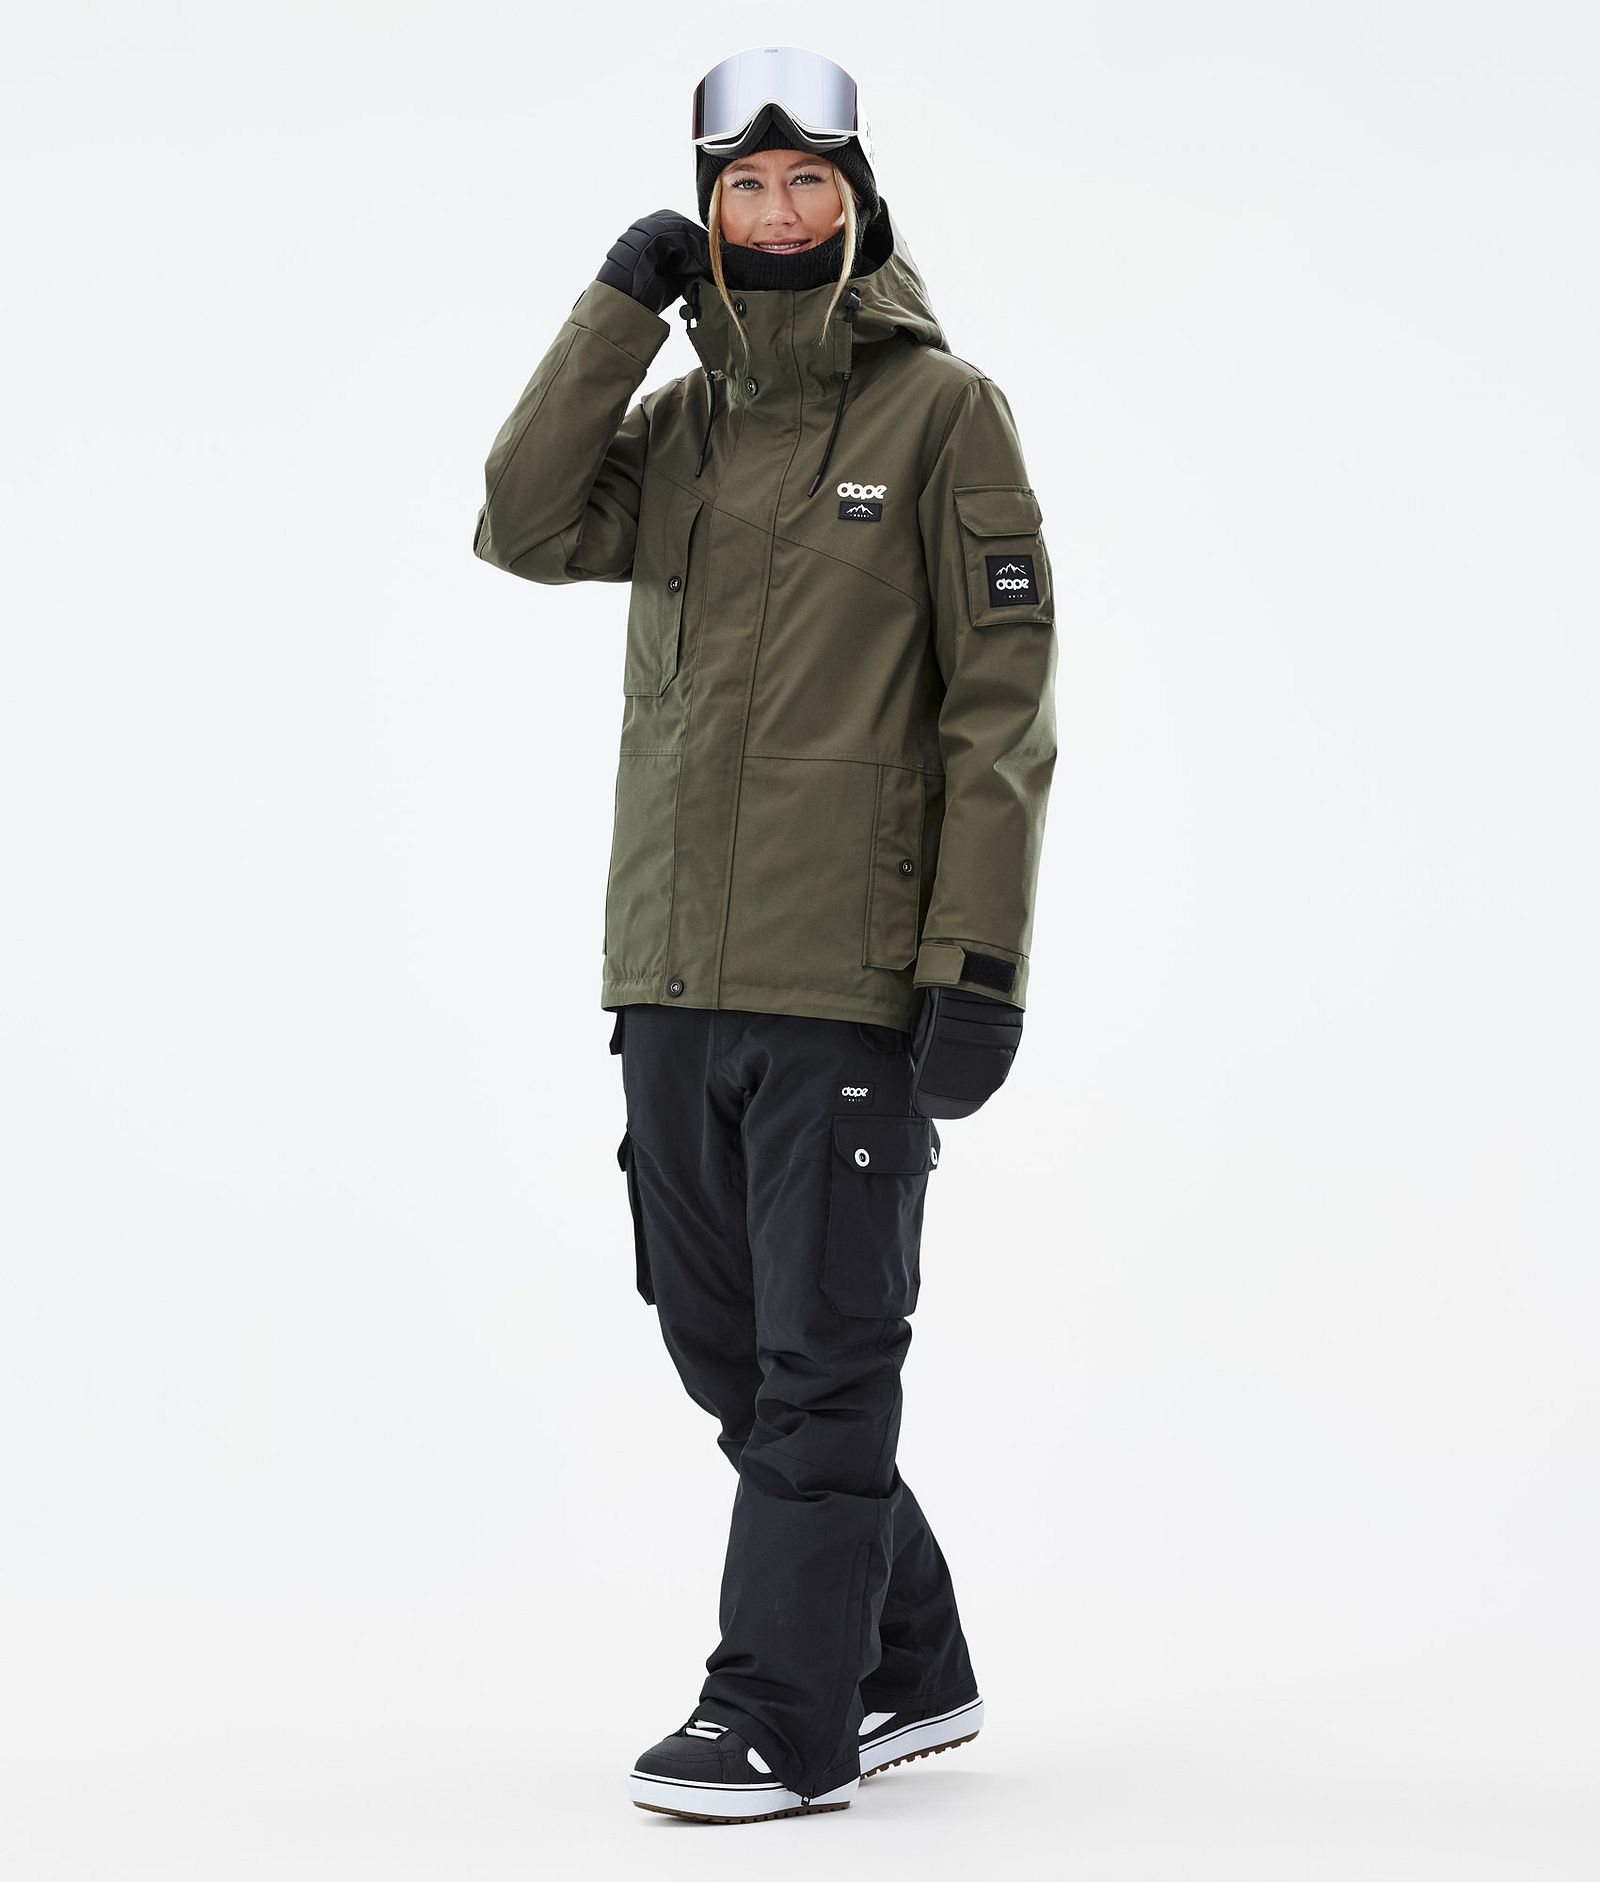 Adept W Outfit Snowboard Femme Olive Green/Black, Image 1 of 2